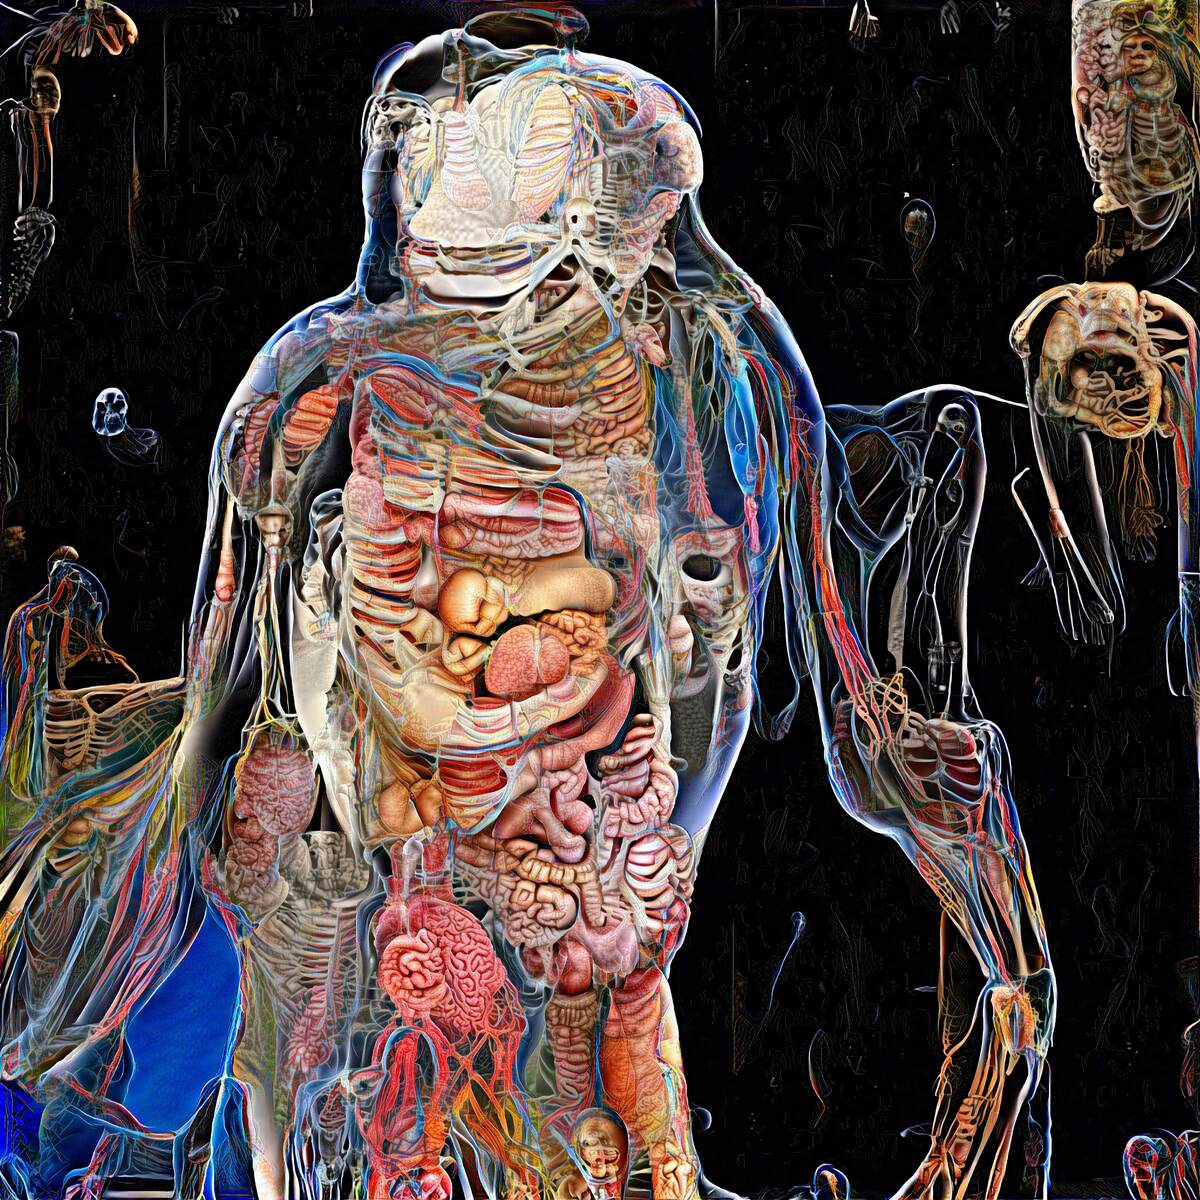 An AI-generated image of what sort of looks like an illustration of human anatomy